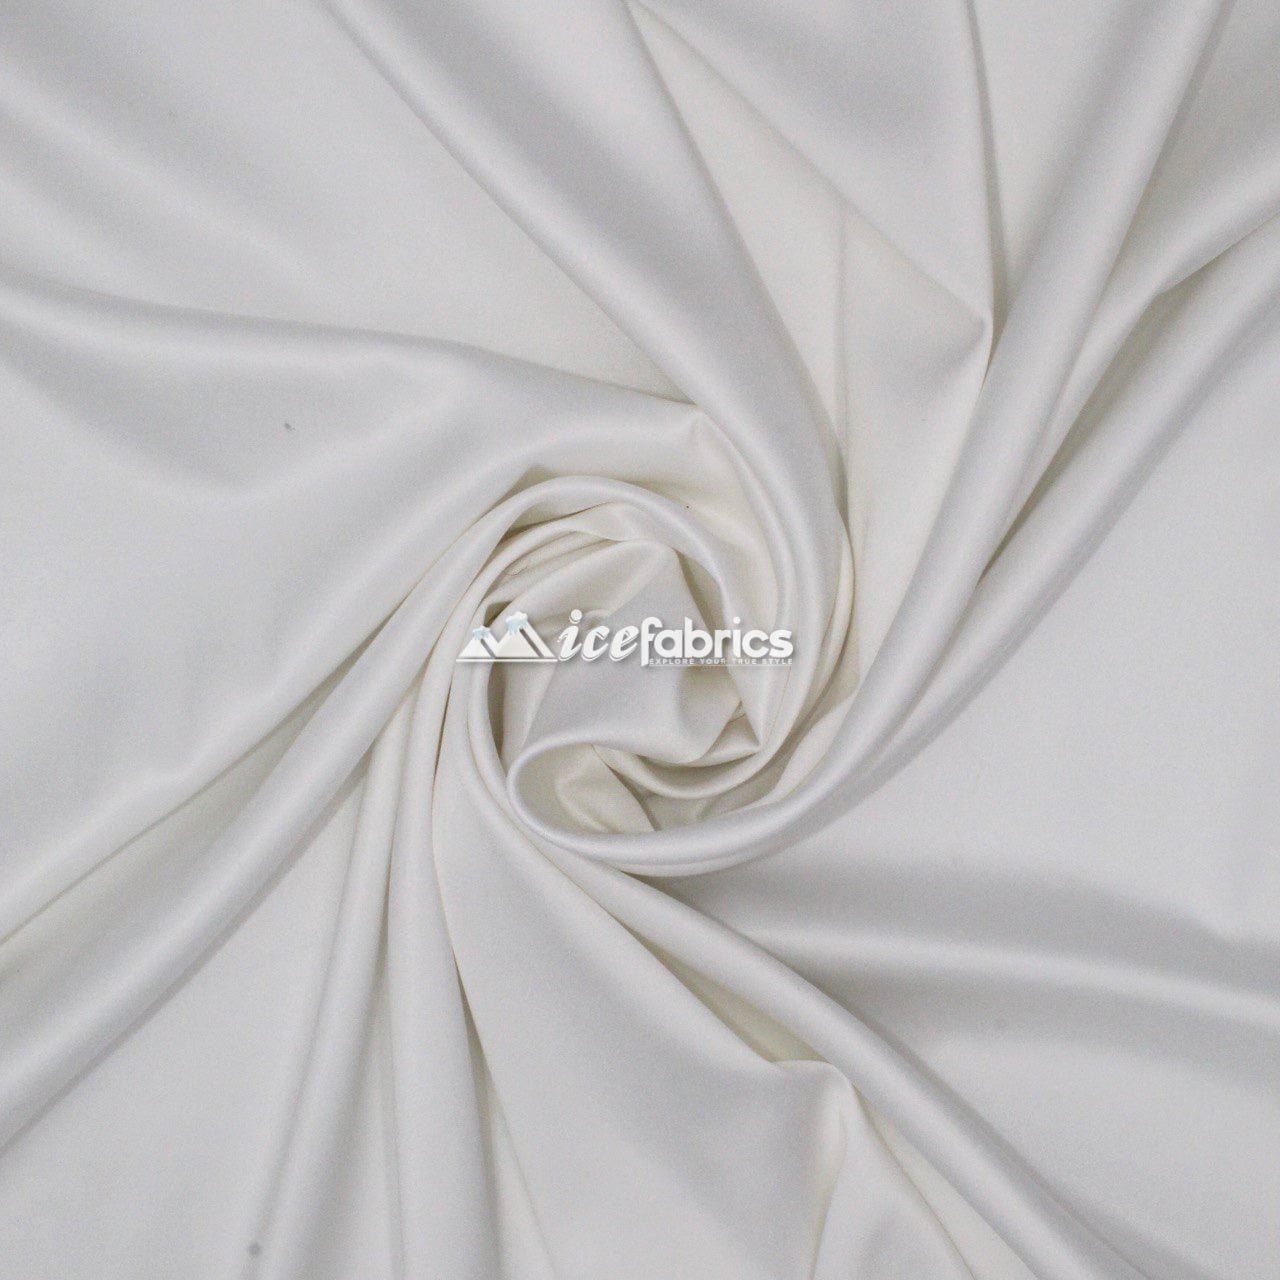 Armani Thick Solid Color Silky Stretch Satin Fabric Sold By The YardSatin FabricICE FABRICSICE FABRICSWhiteArmani Thick Solid Color Silky Stretch Satin Fabric Sold By The Yard ICE FABRICS White